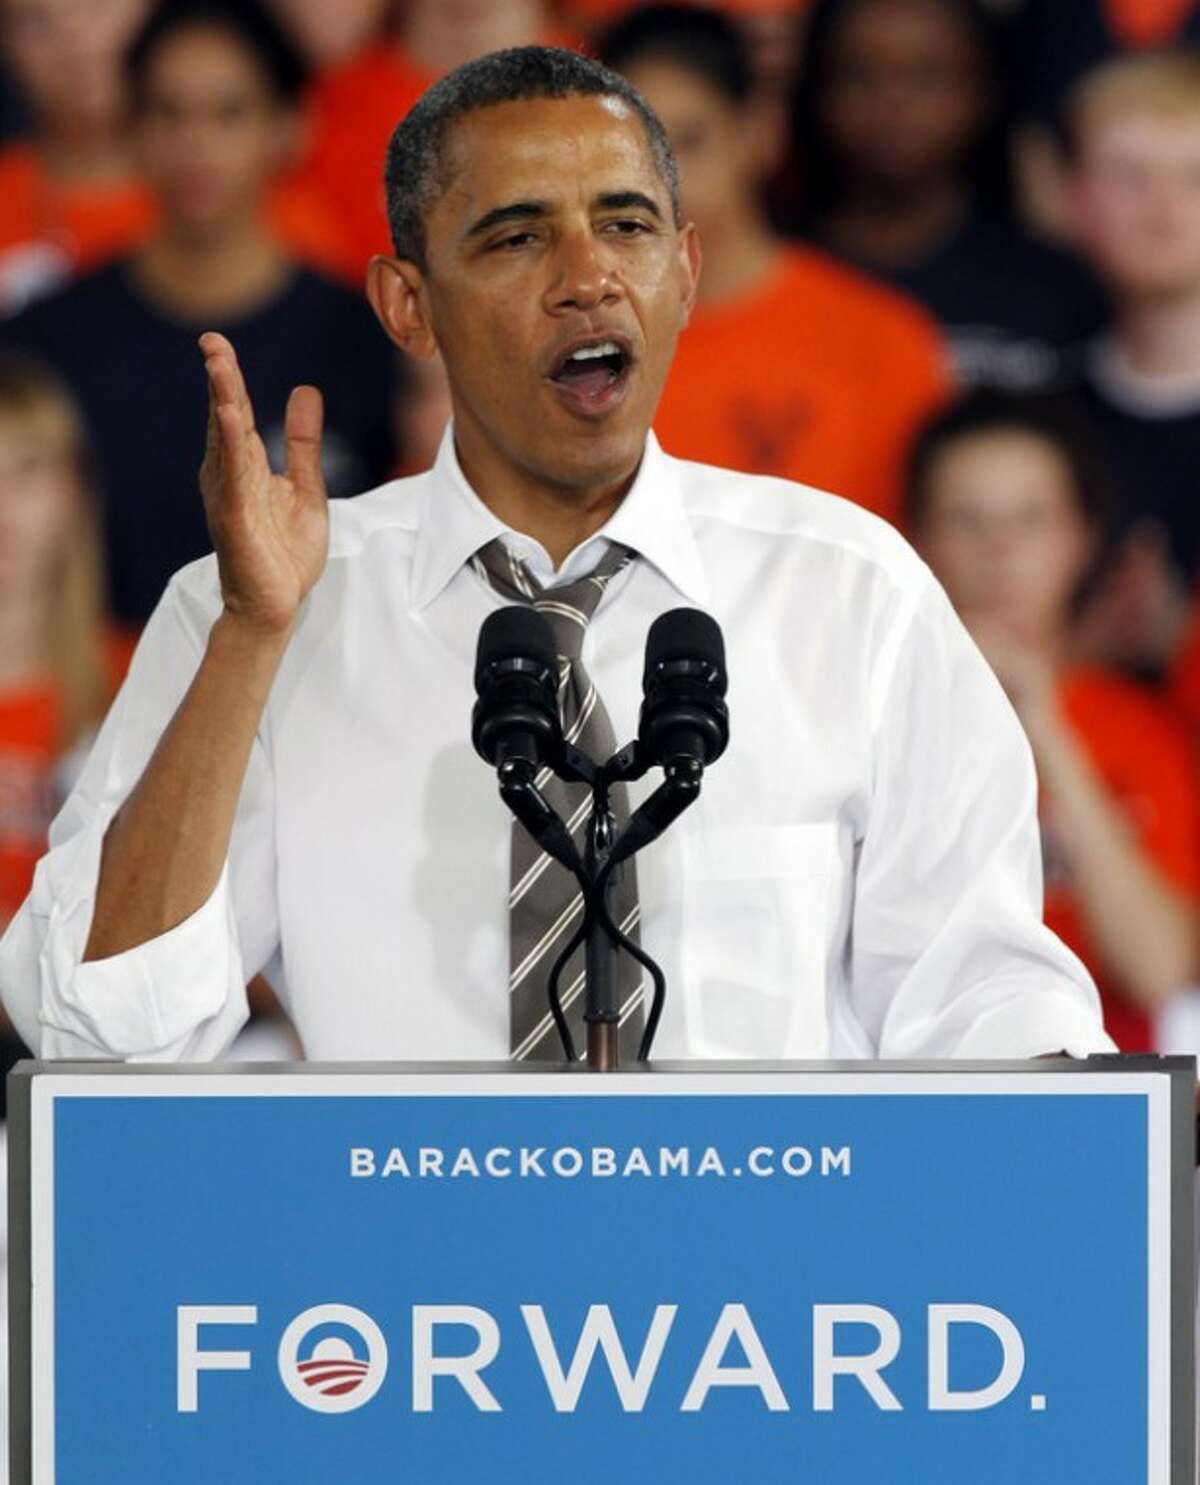 President Barack Obama gestures during a rally in Charlottesville, Va., Wednesday, Aug. 29, 2012. (AP Photo/Steve Helber)